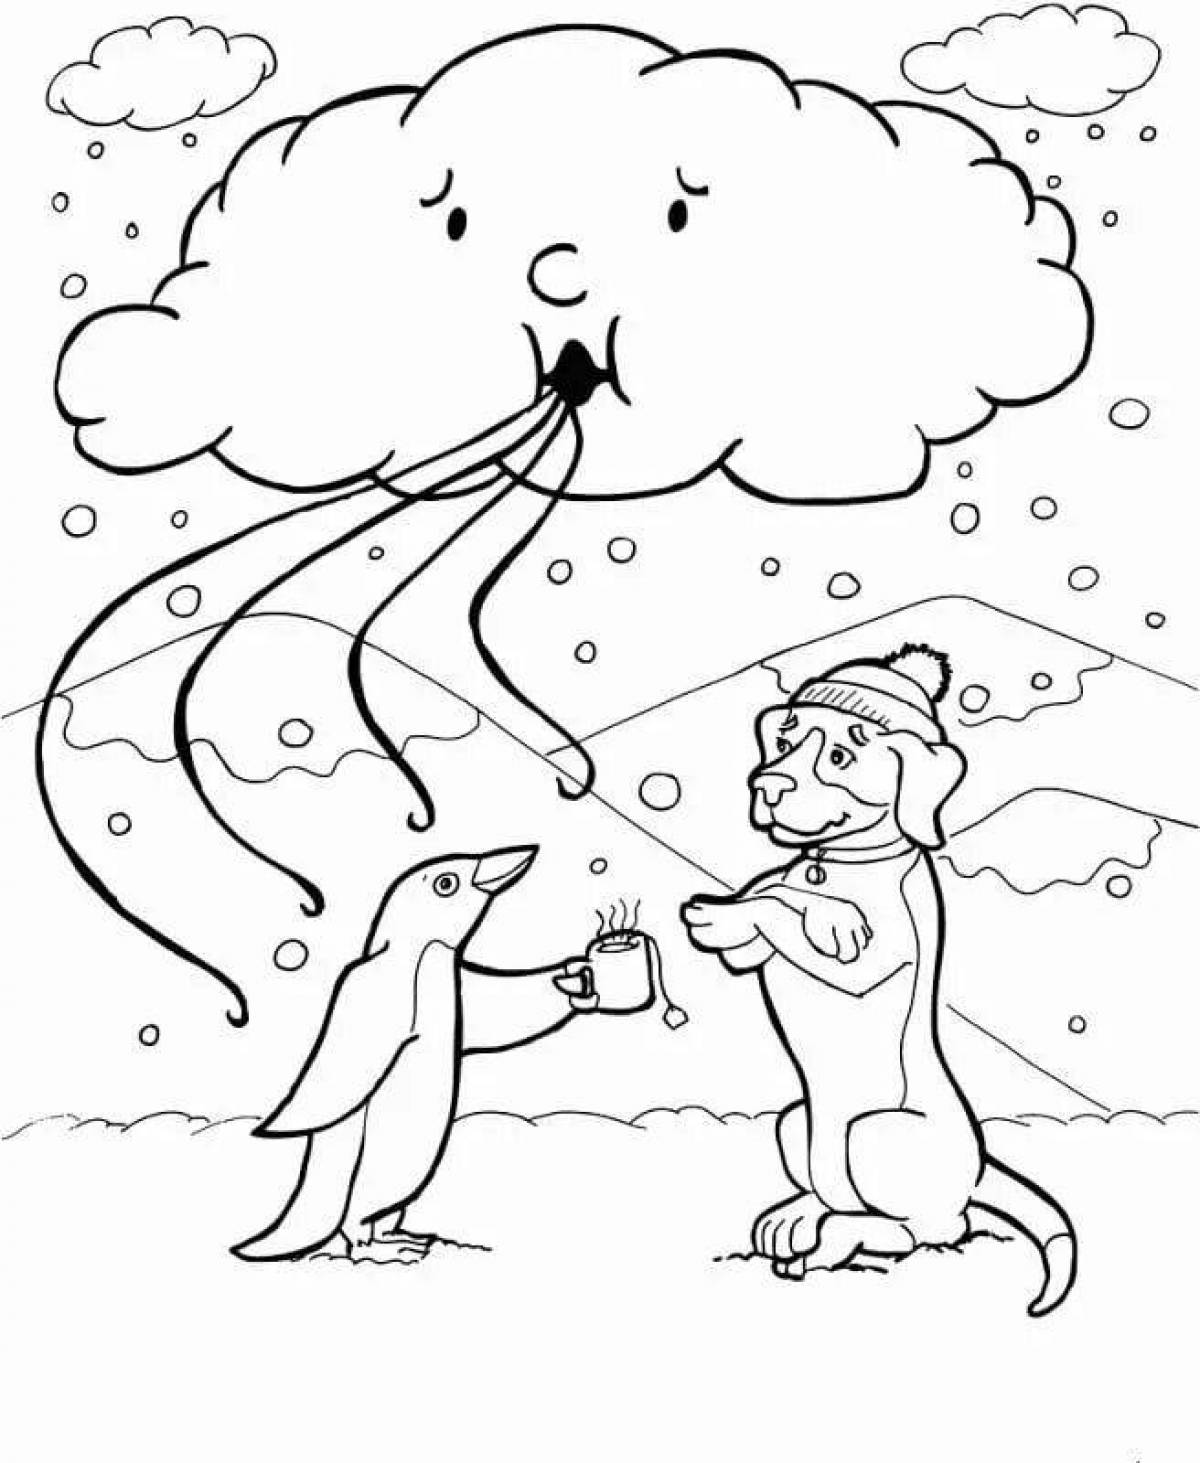 Shiny wind coloring page